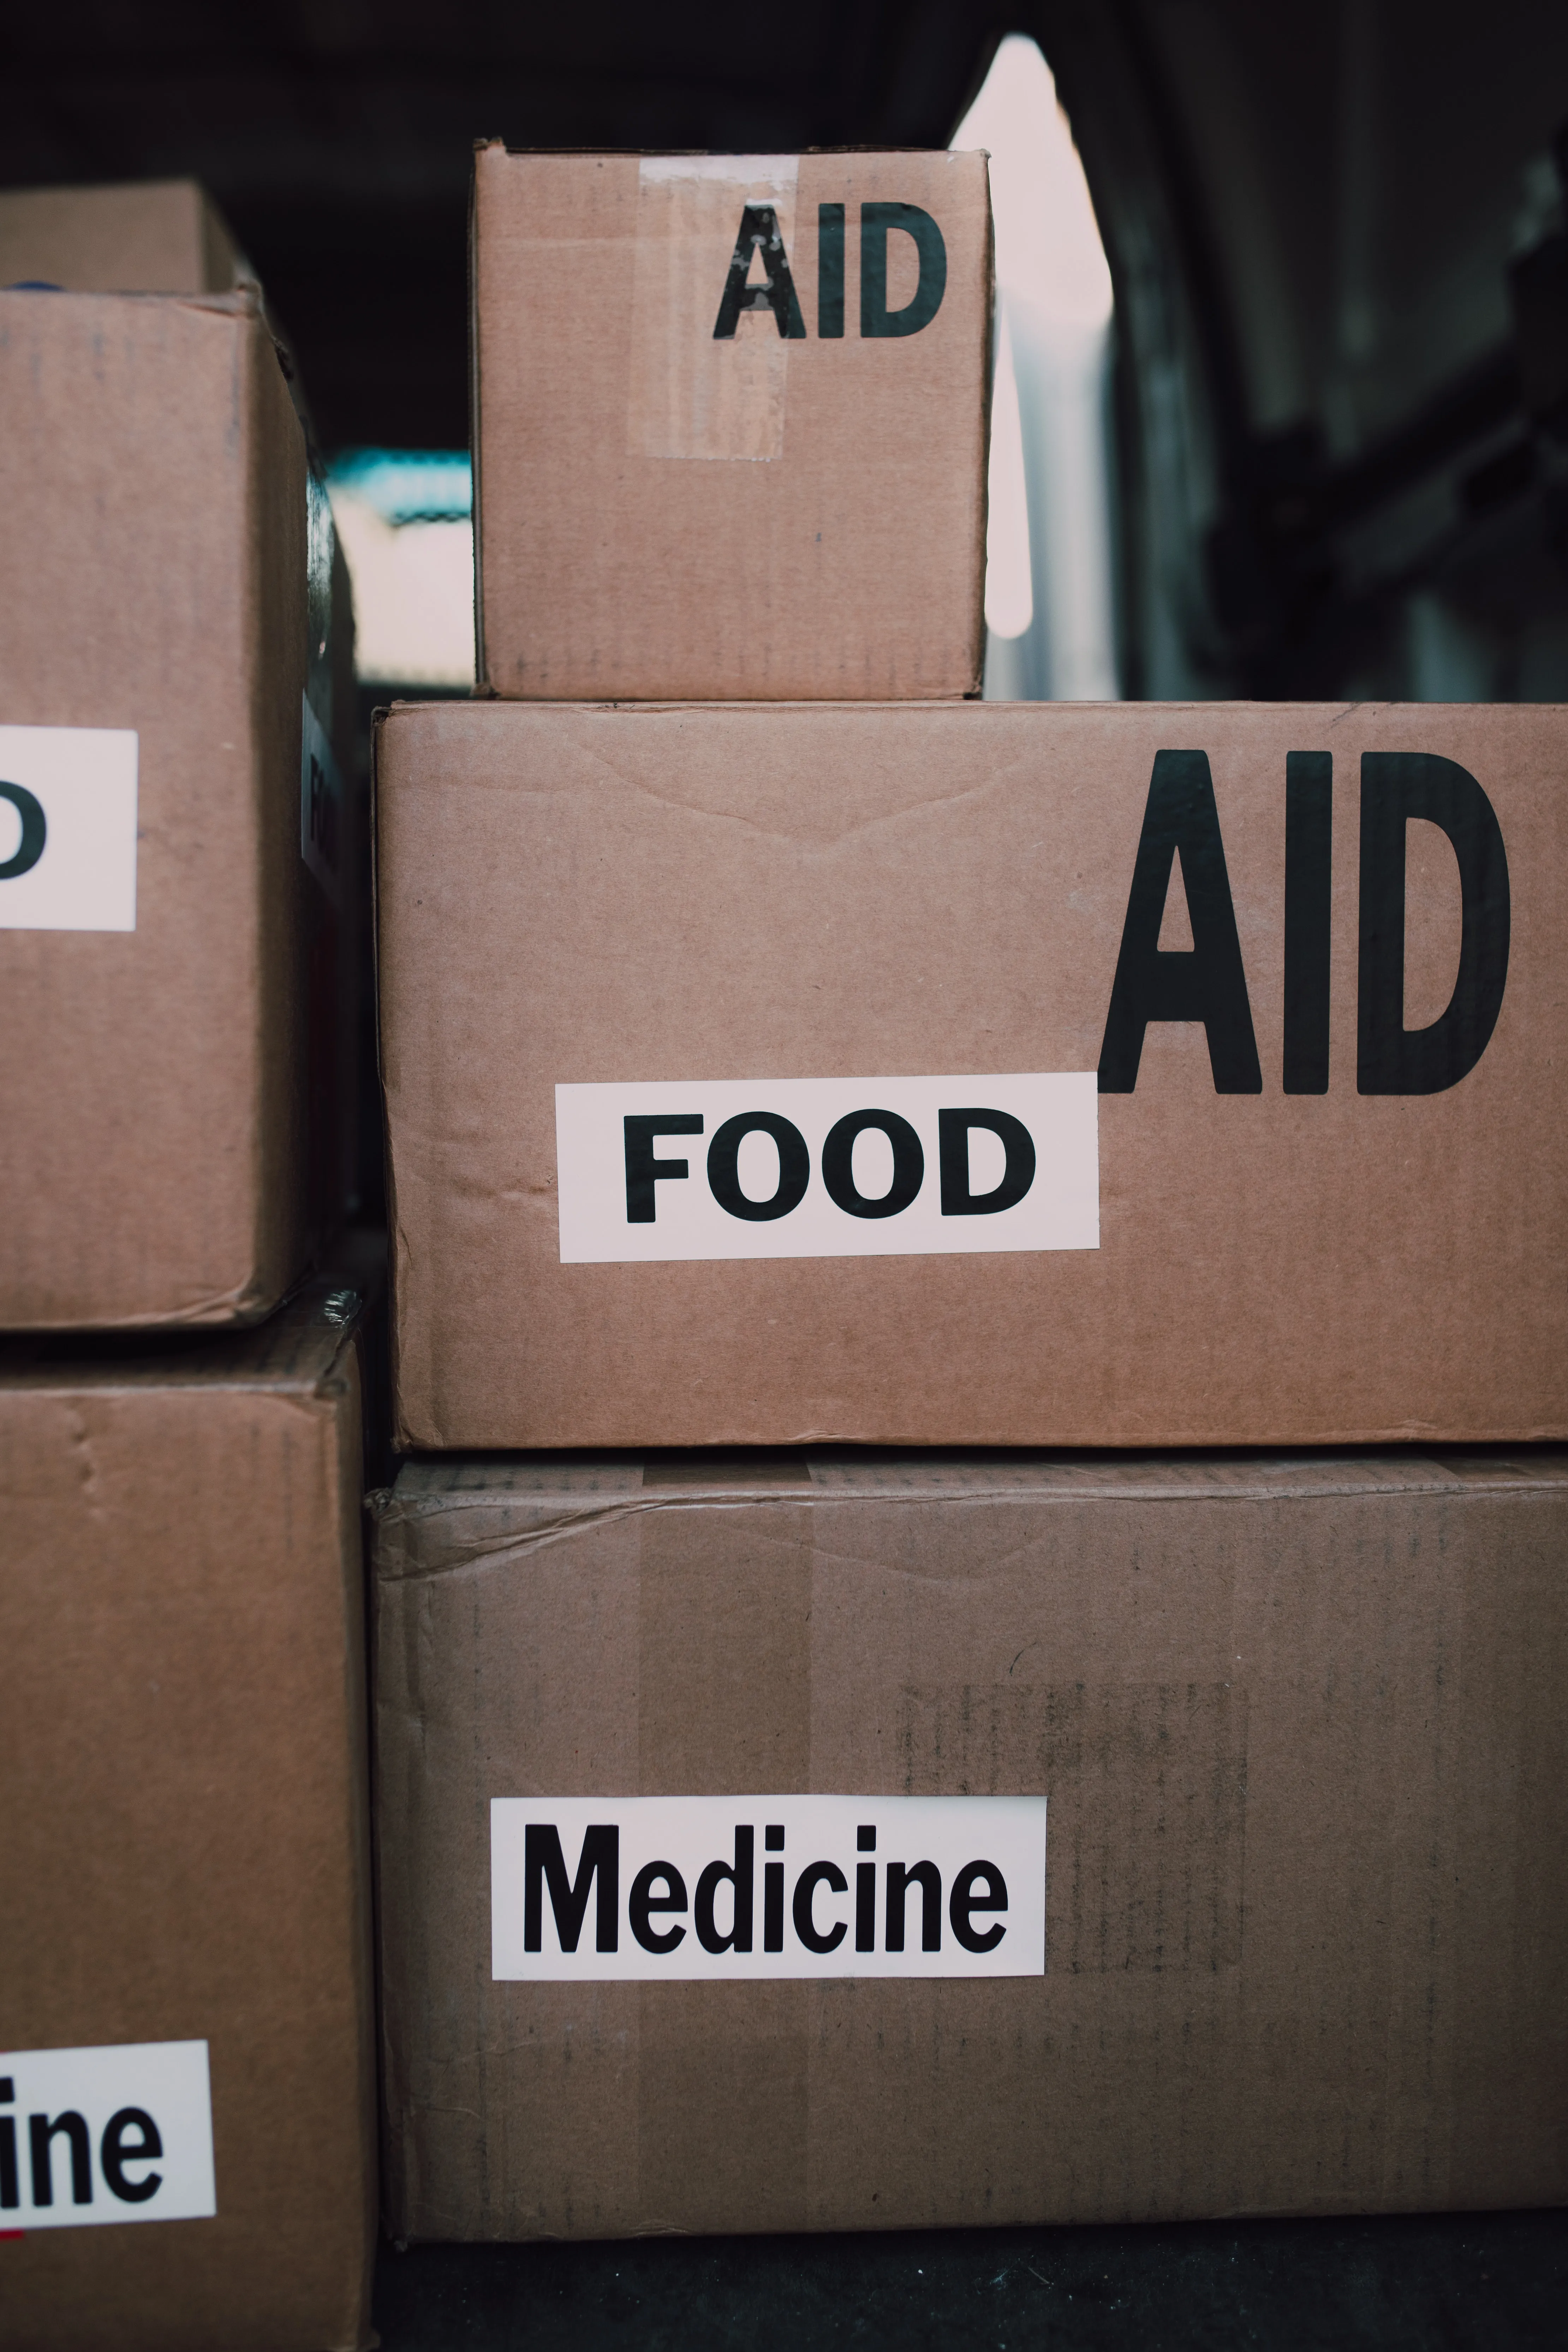 boxes of food and medicine aid